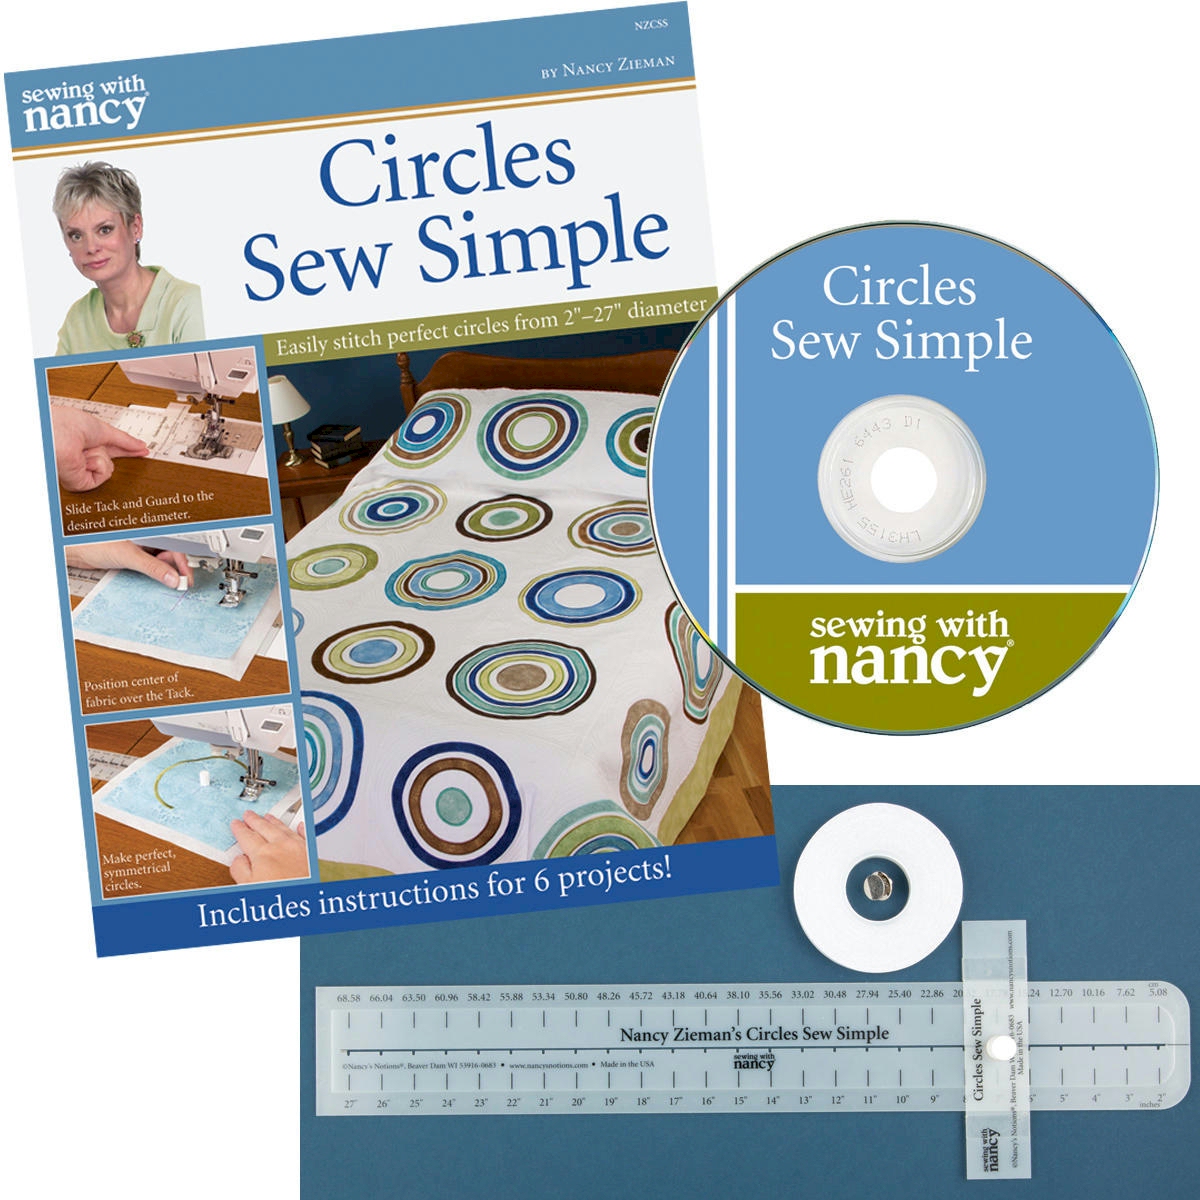 Circles Sew Simple Tool with Book & DVD from Sewing With Nancy